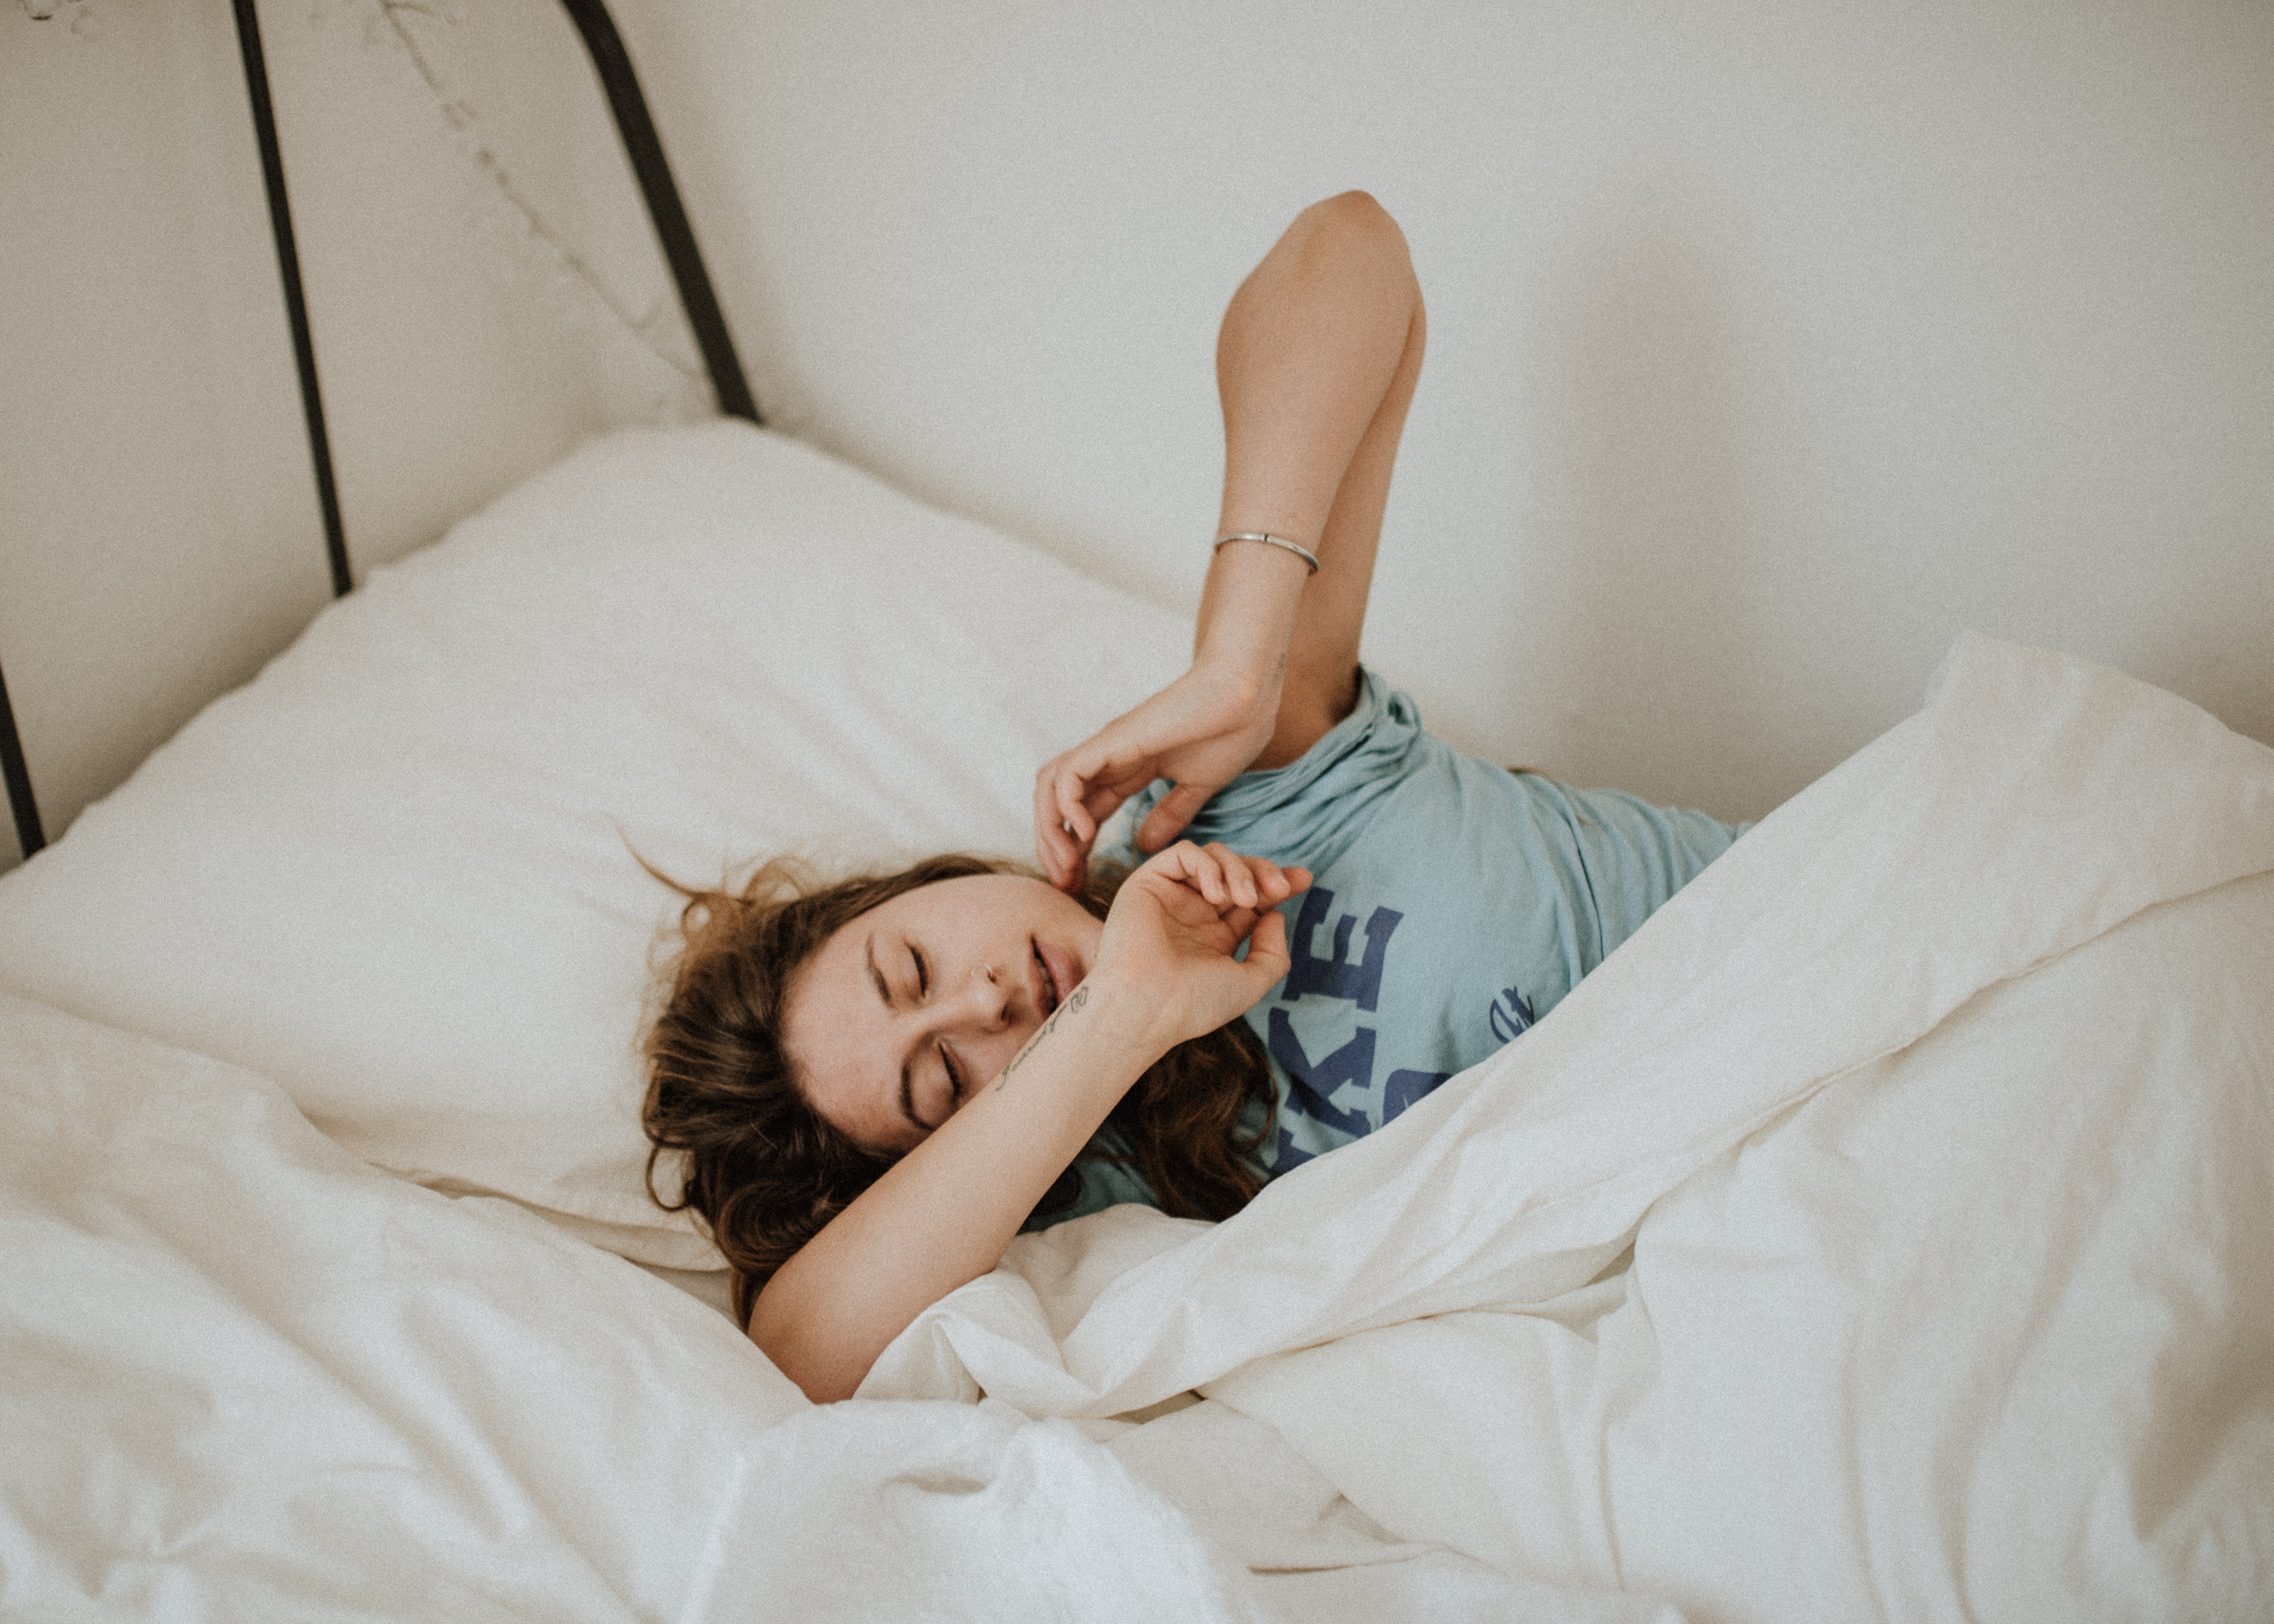 5 Morning Rituals For People Who'd Rather Stay In Bed